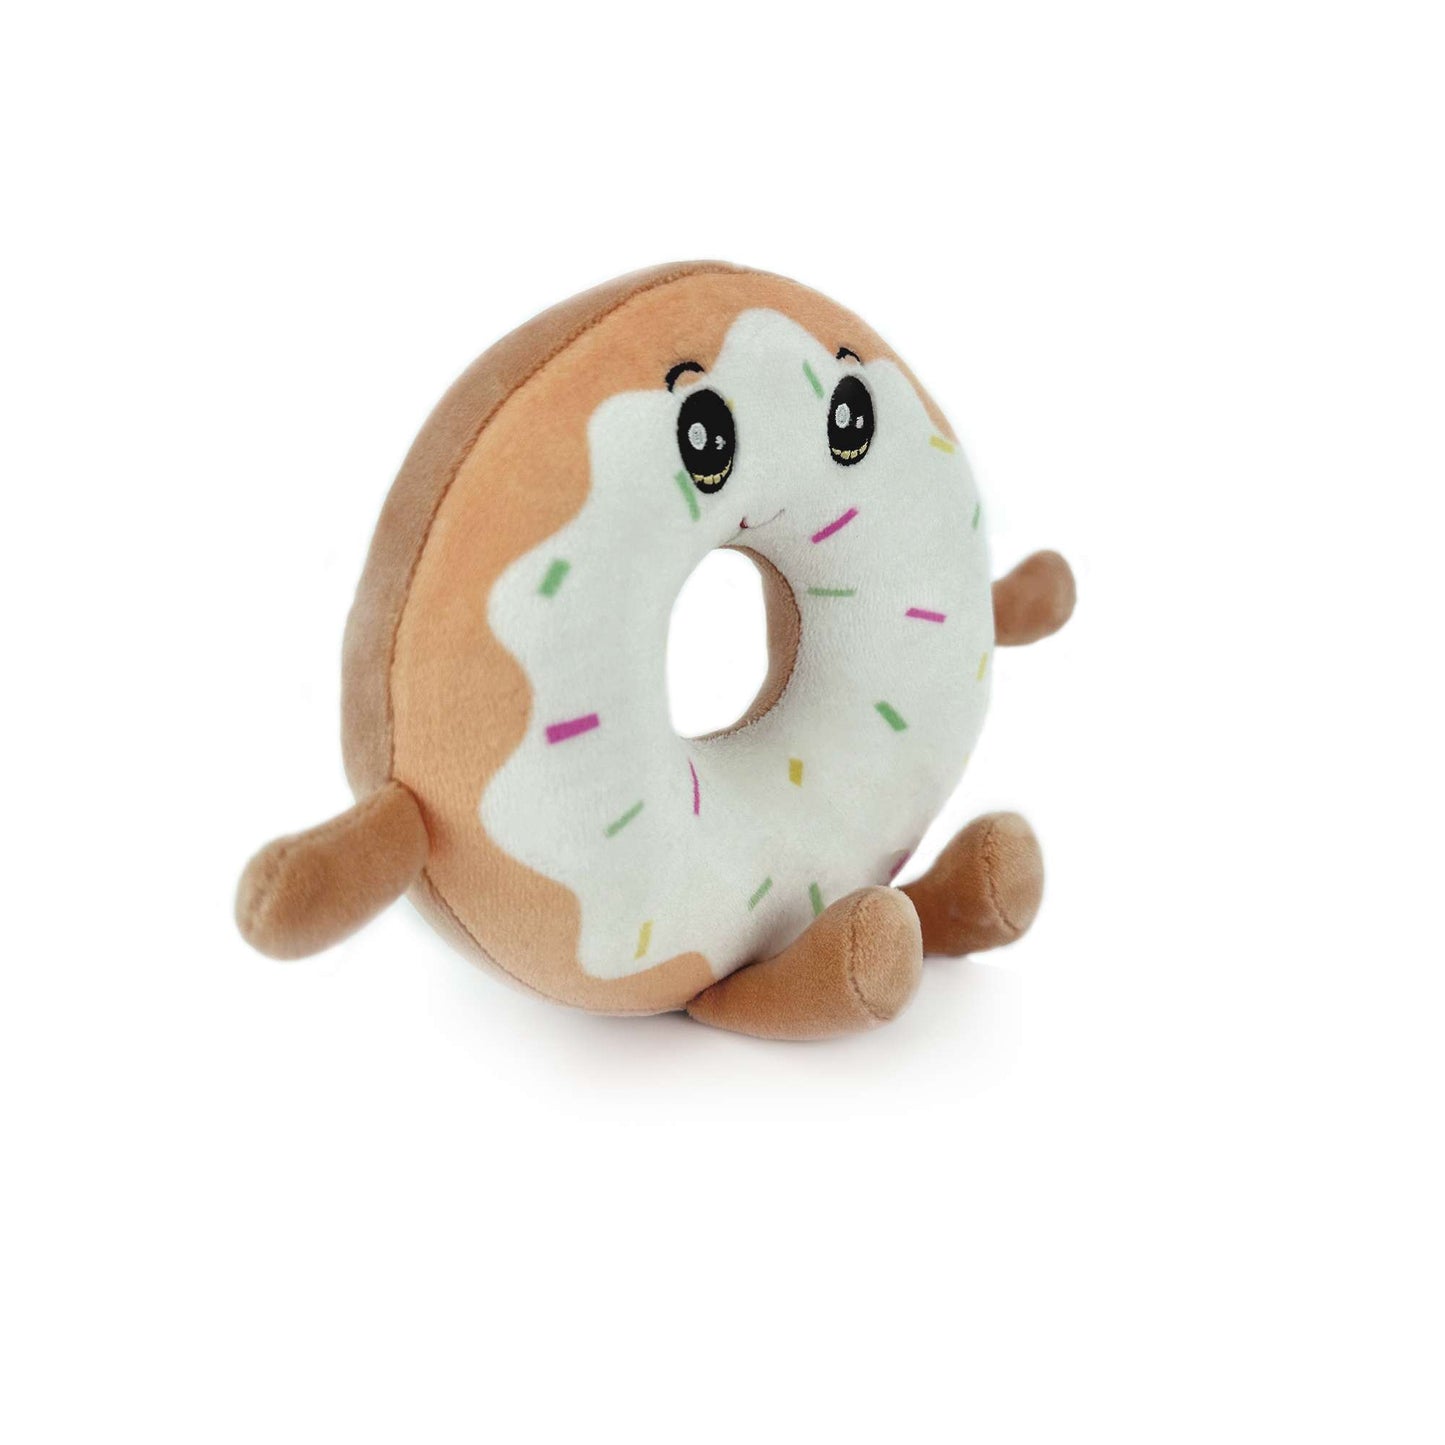 Side view of plush donut toy